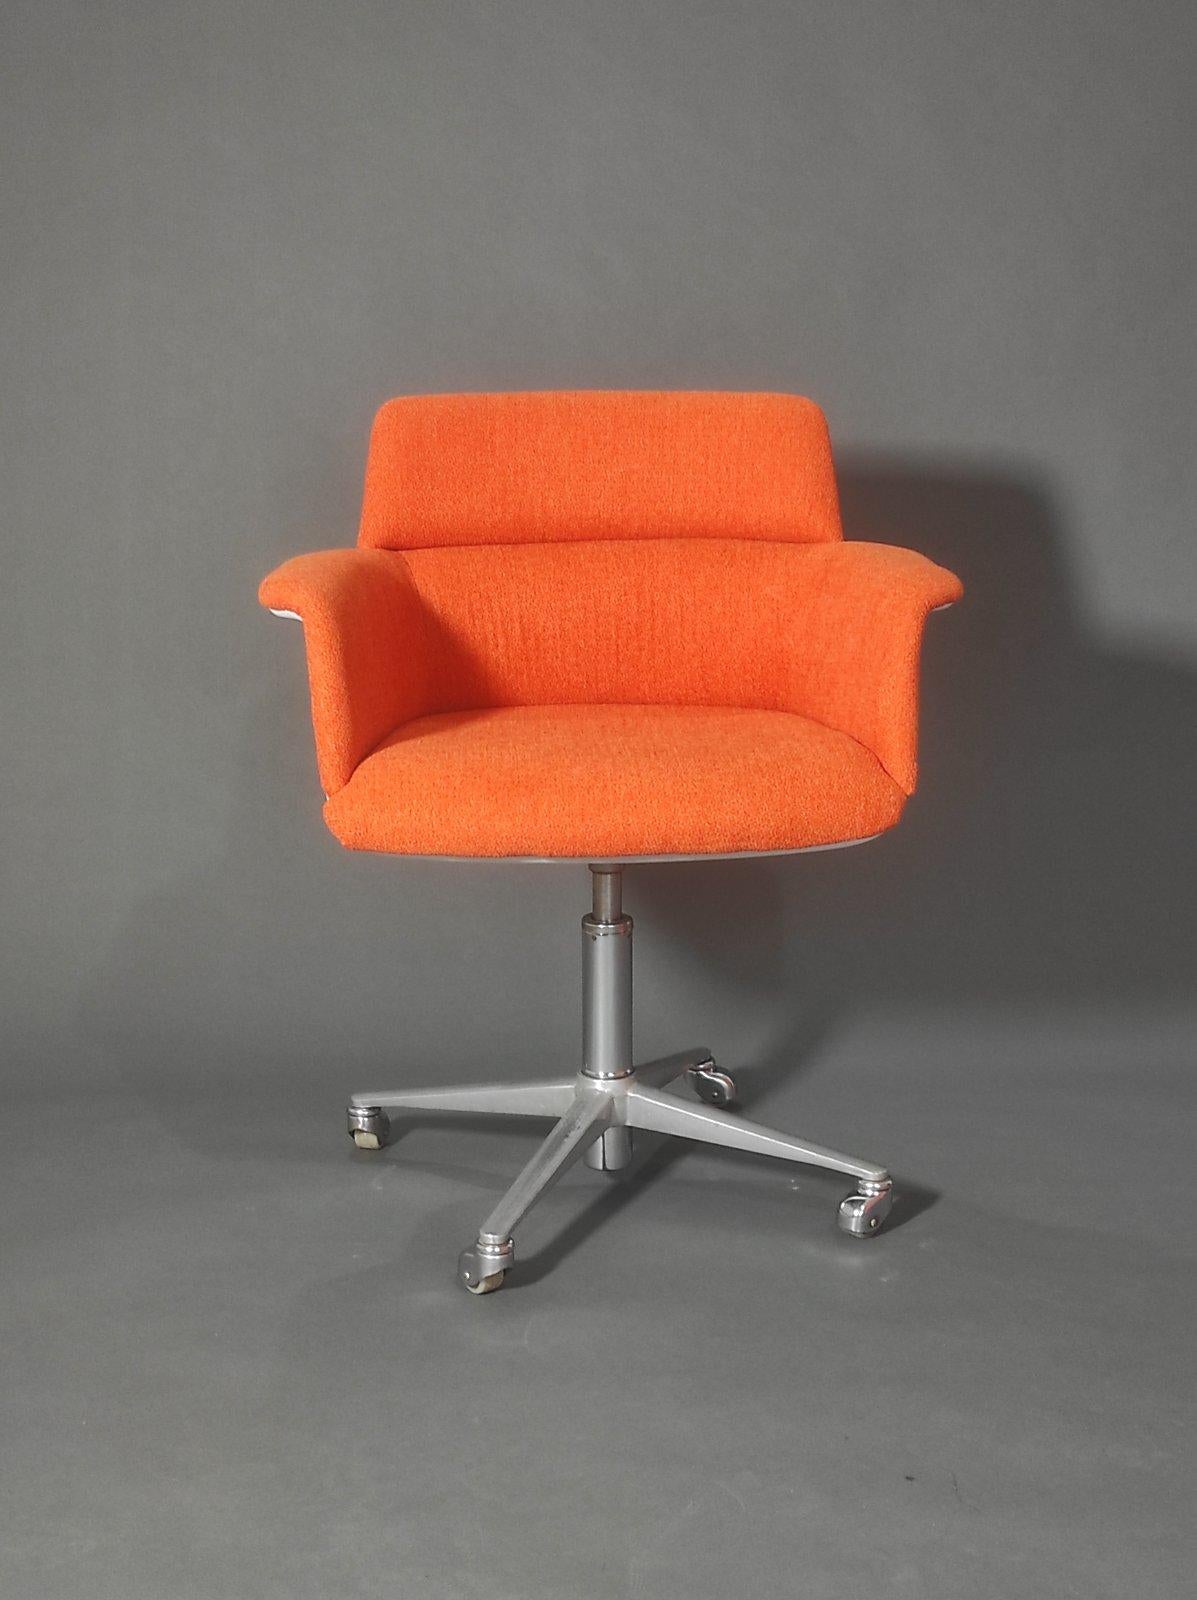 German Model 250 Space Age Ofice Chair By Georg Leowald for Vilkhahn 1960s For Sale